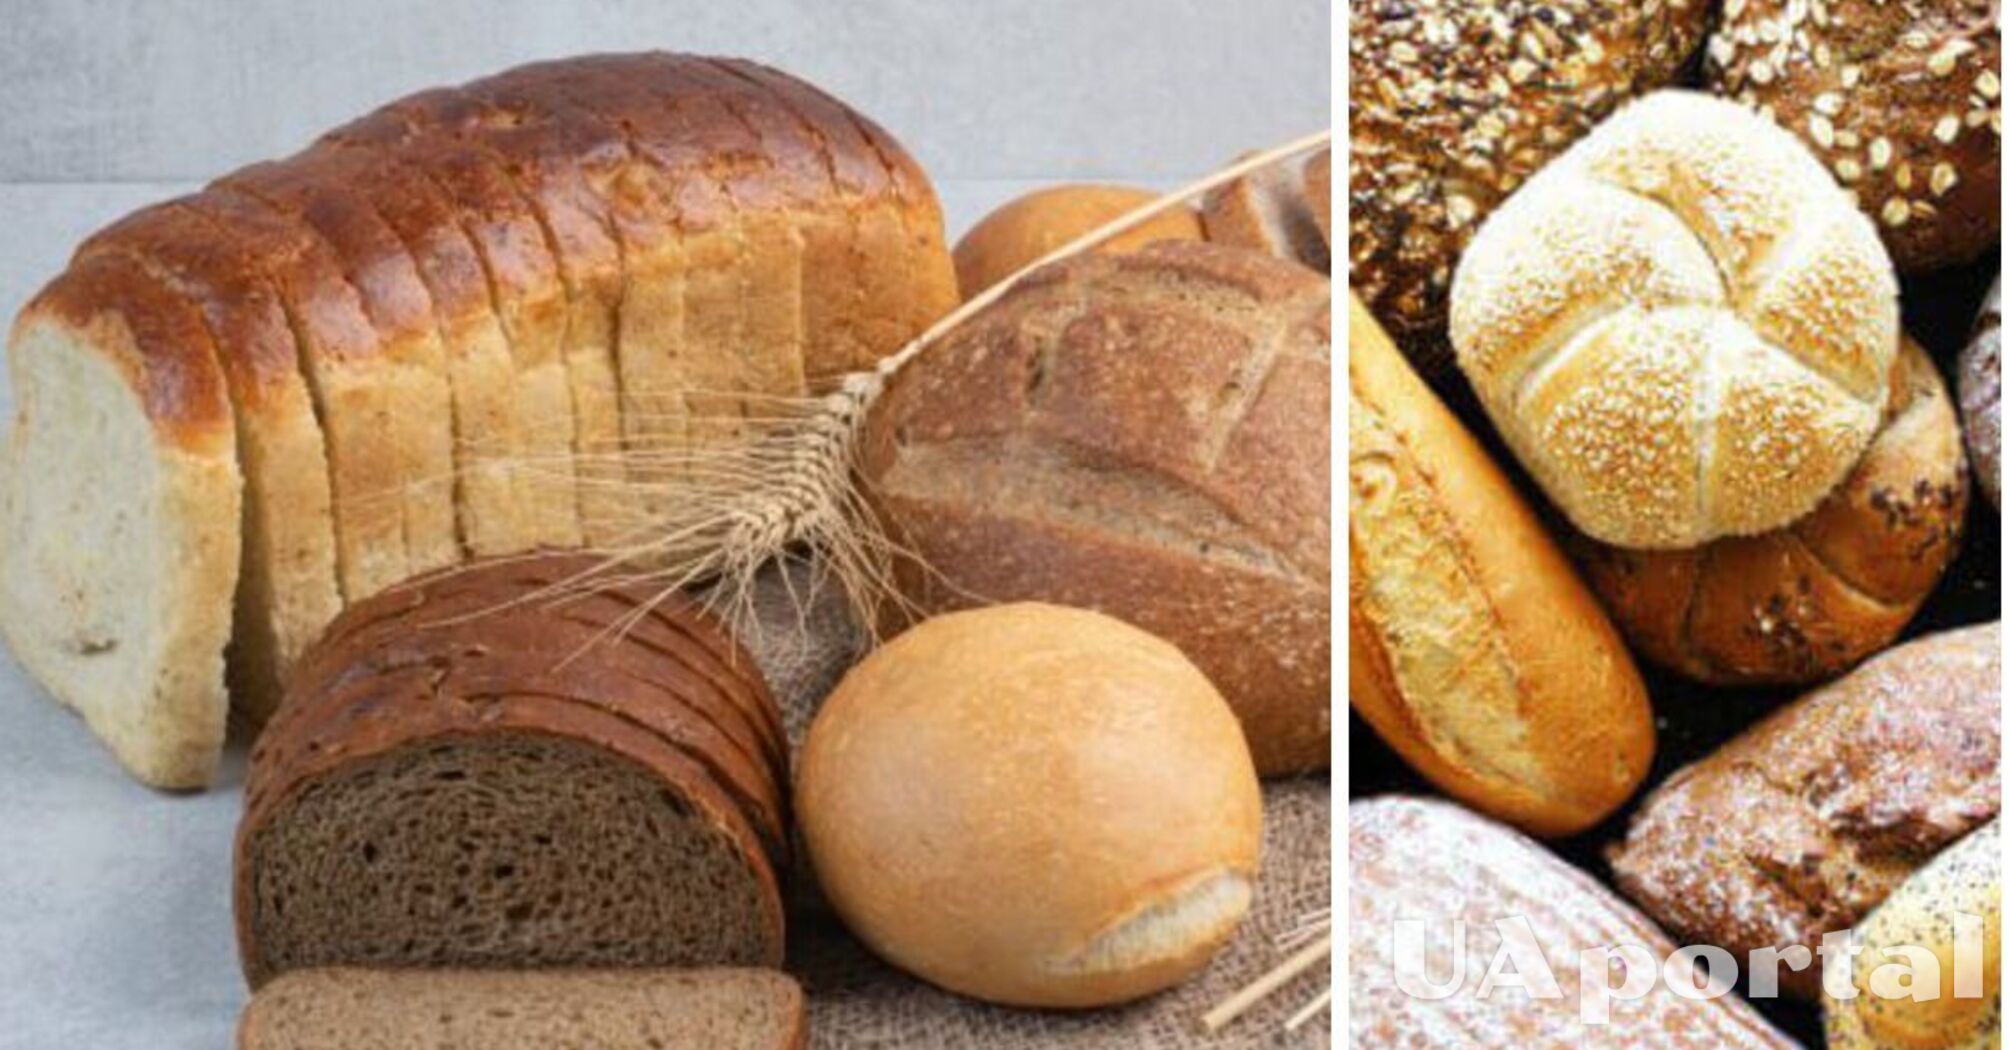 Which bread is healthier for the stomach